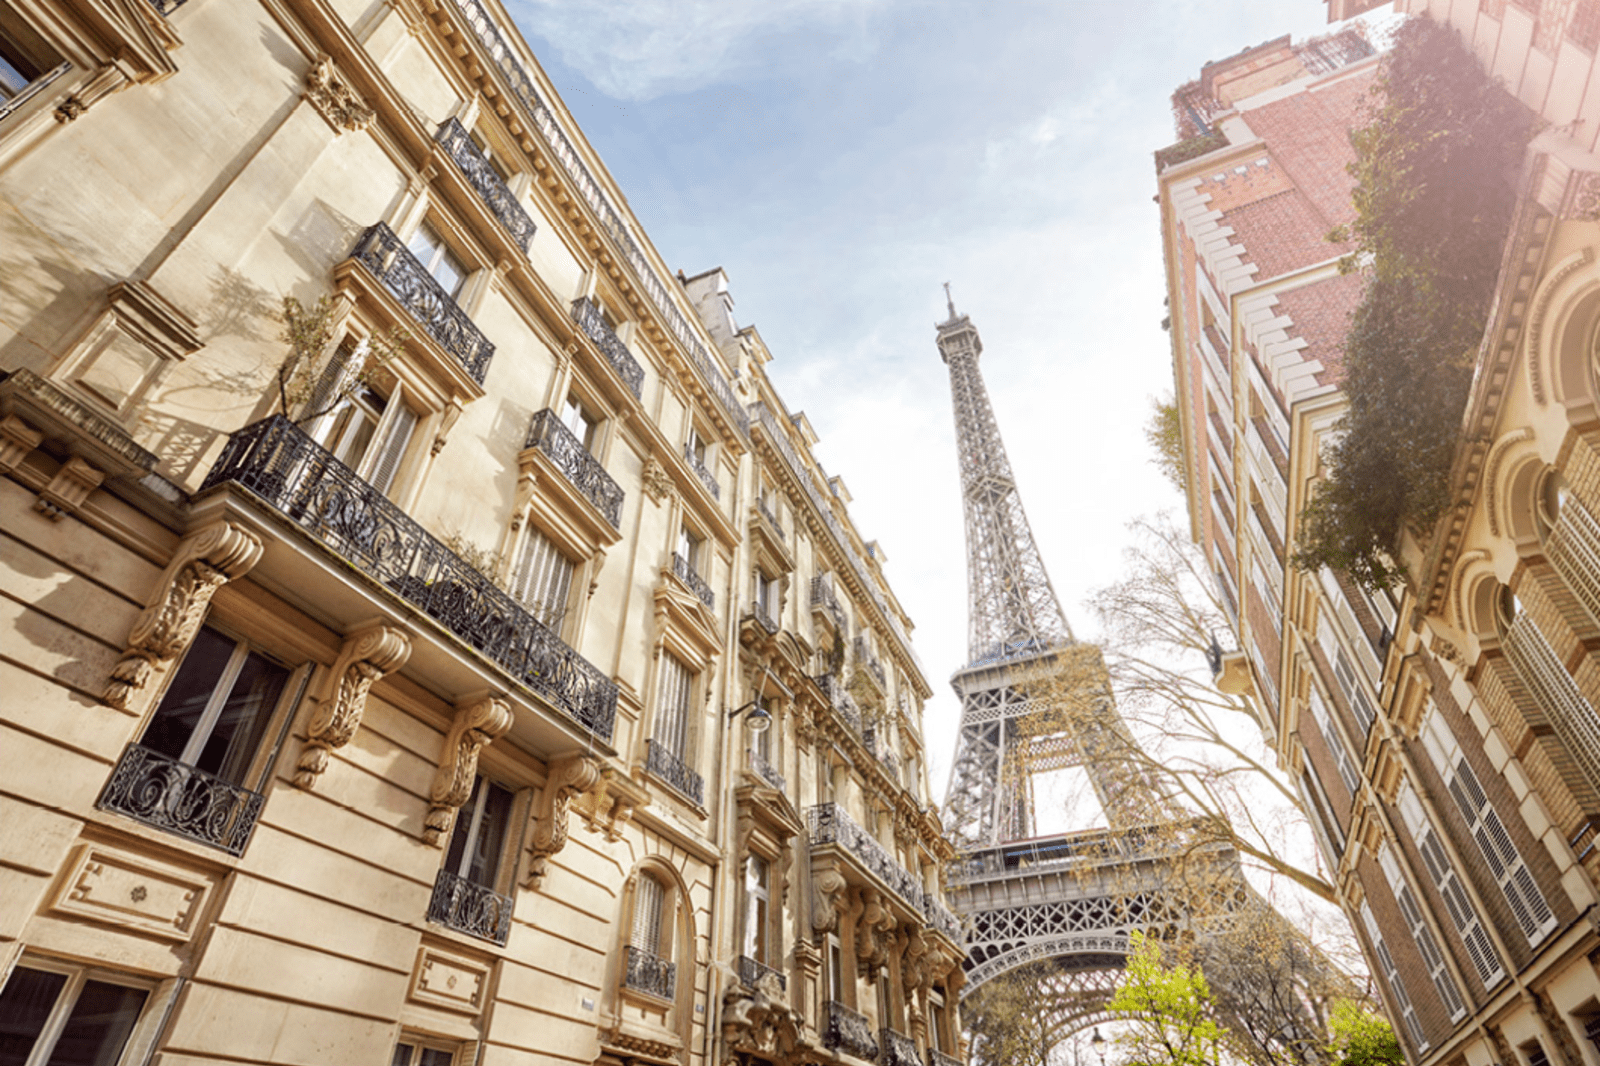 The Eiffel Tower can be seen from almost anywhere in the Gros-Caillou neighbourhood, one of the best areas to stay in Paris